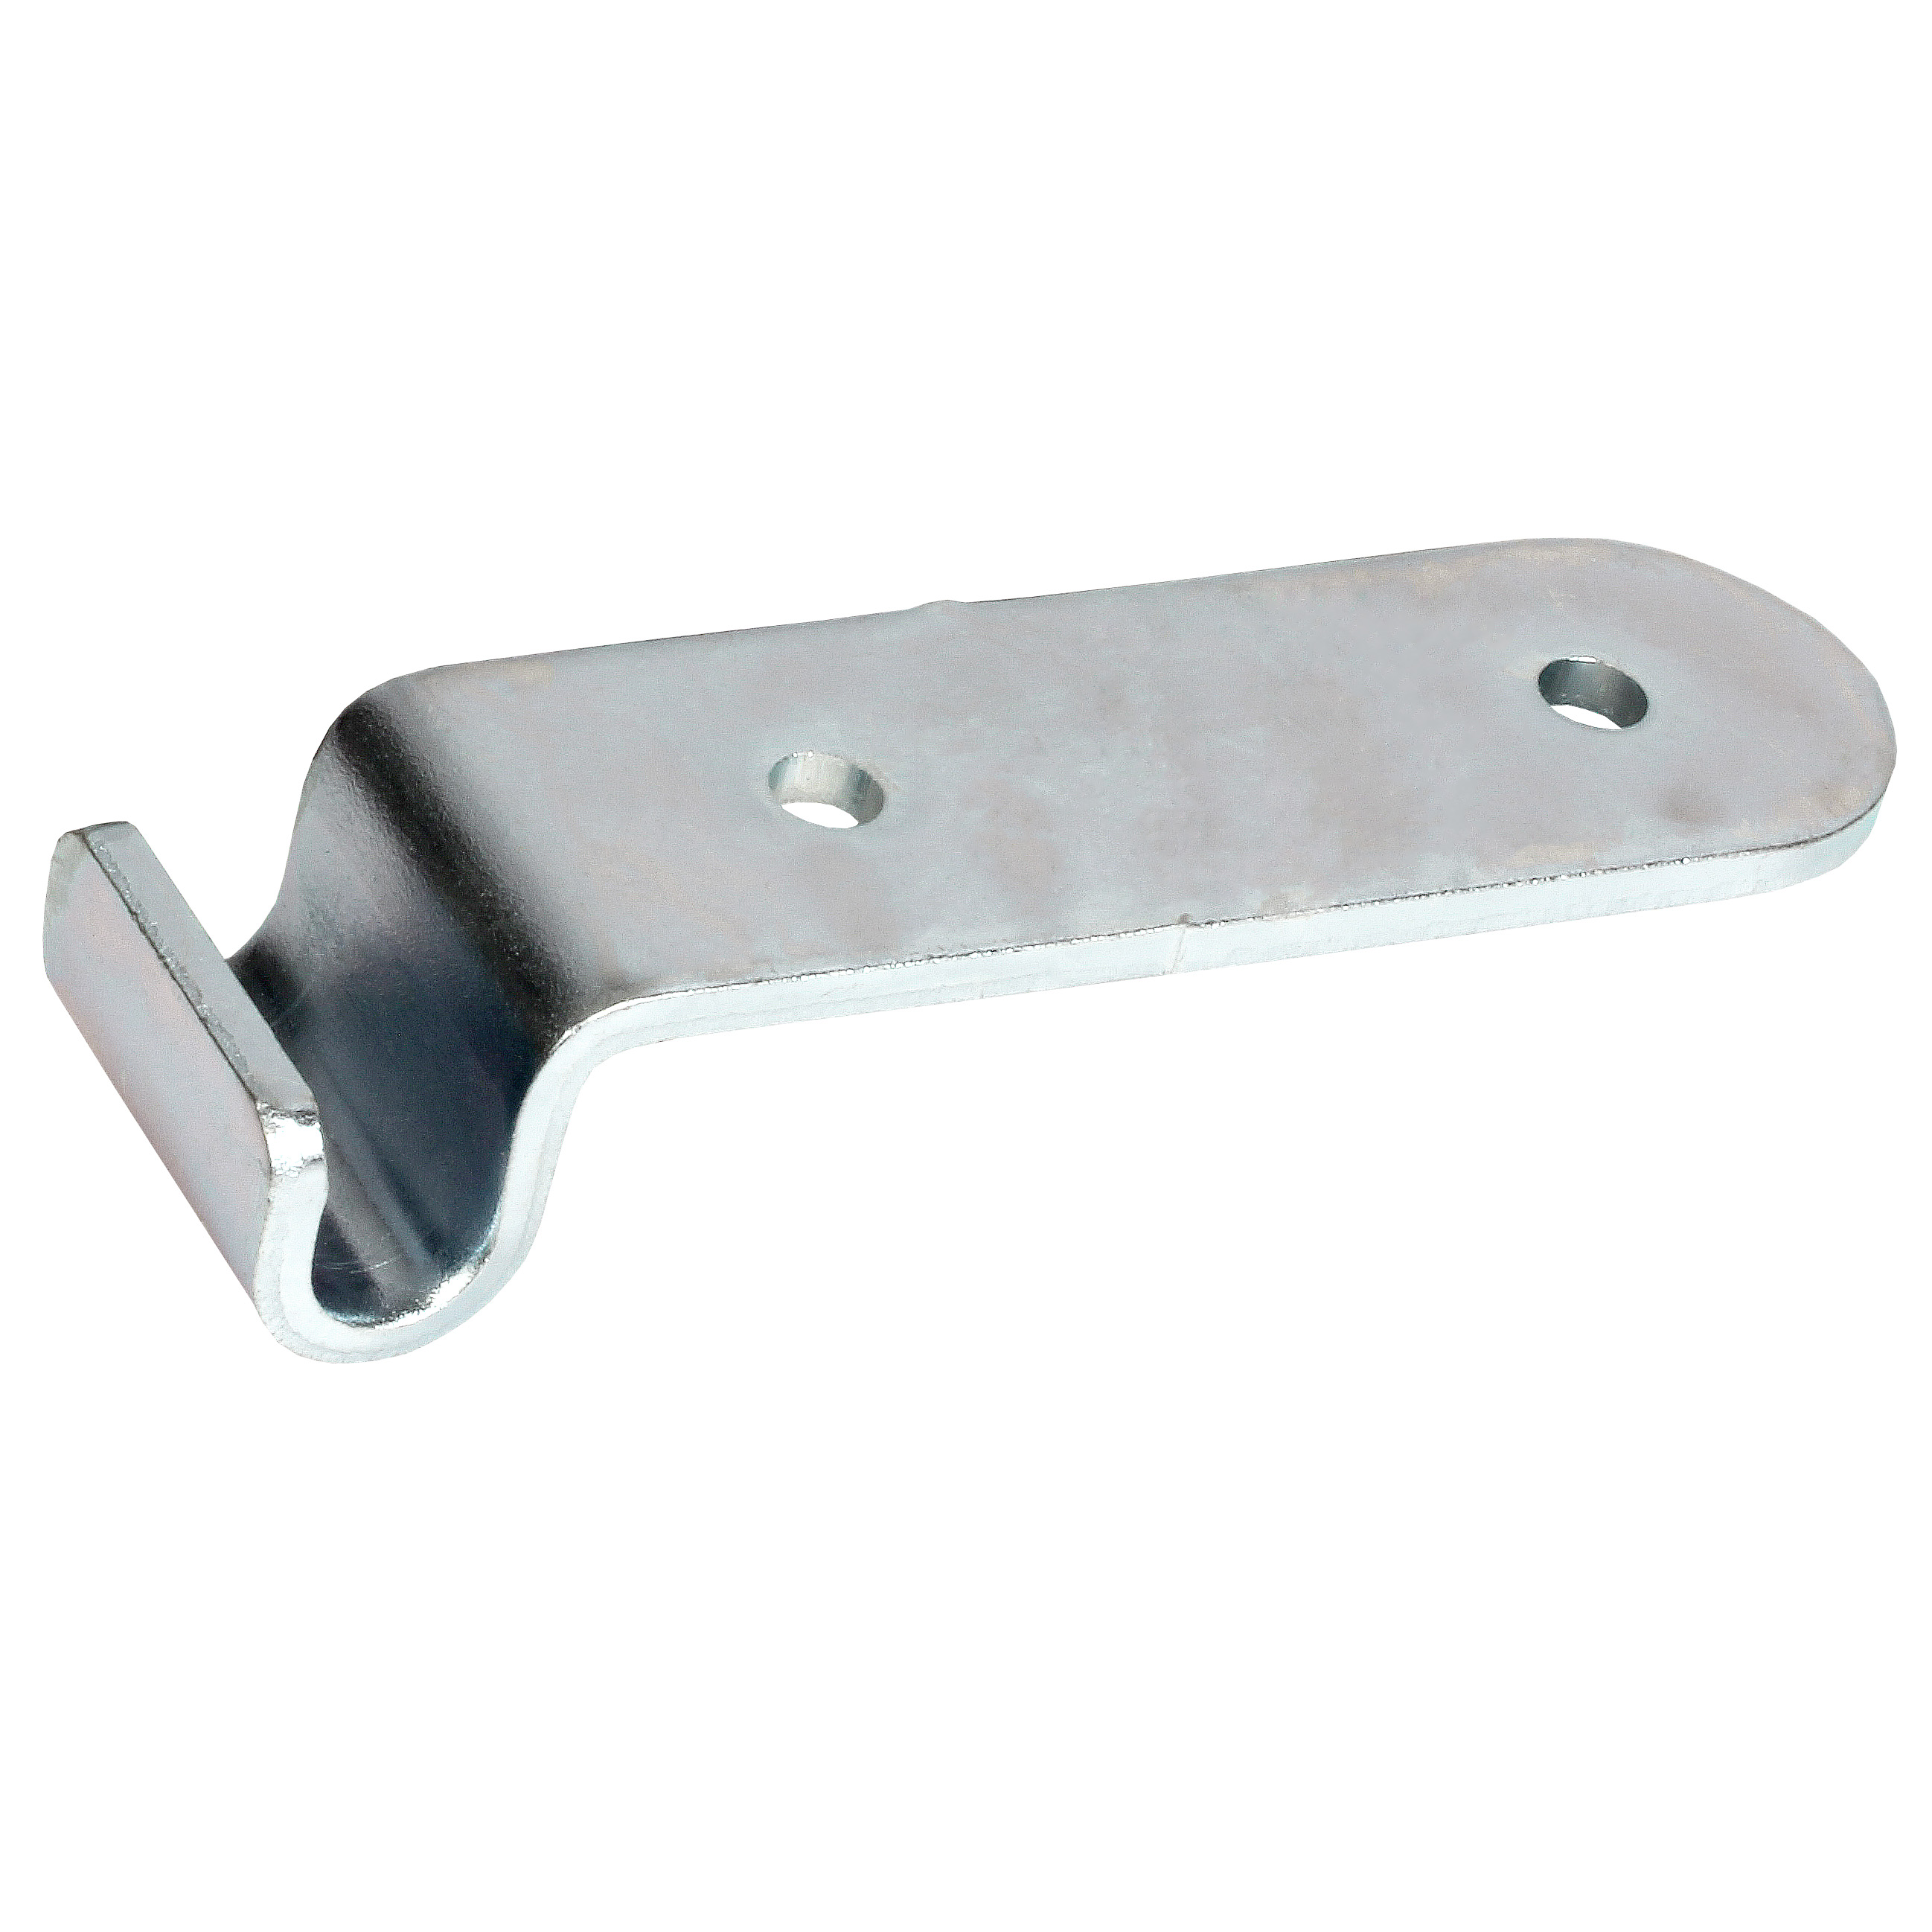 Strike for toggle latch - 25.5mm - Steel - Right angled